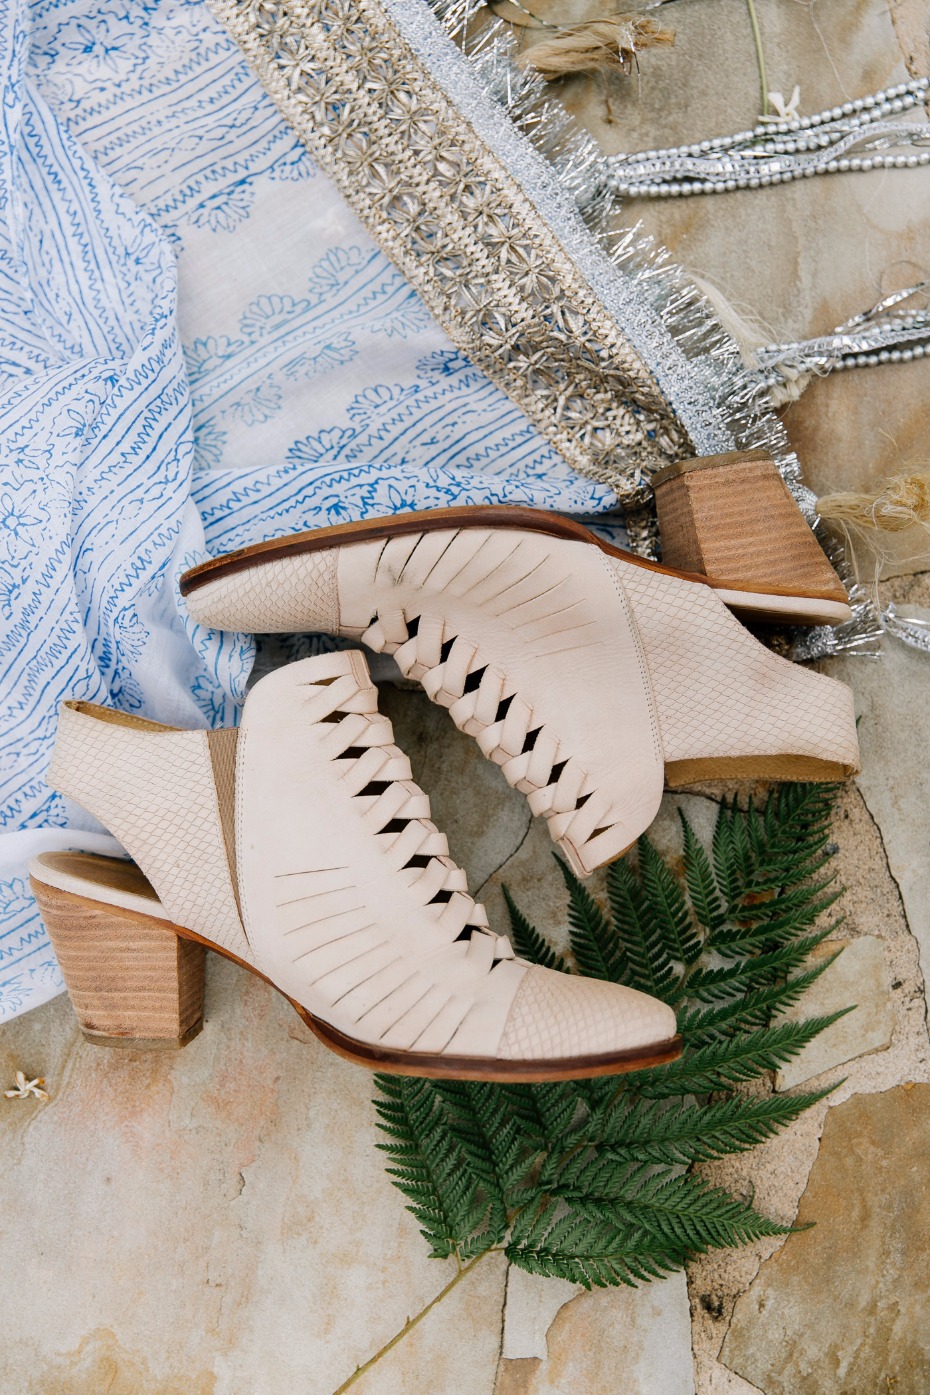 Free People blush booties for the bride